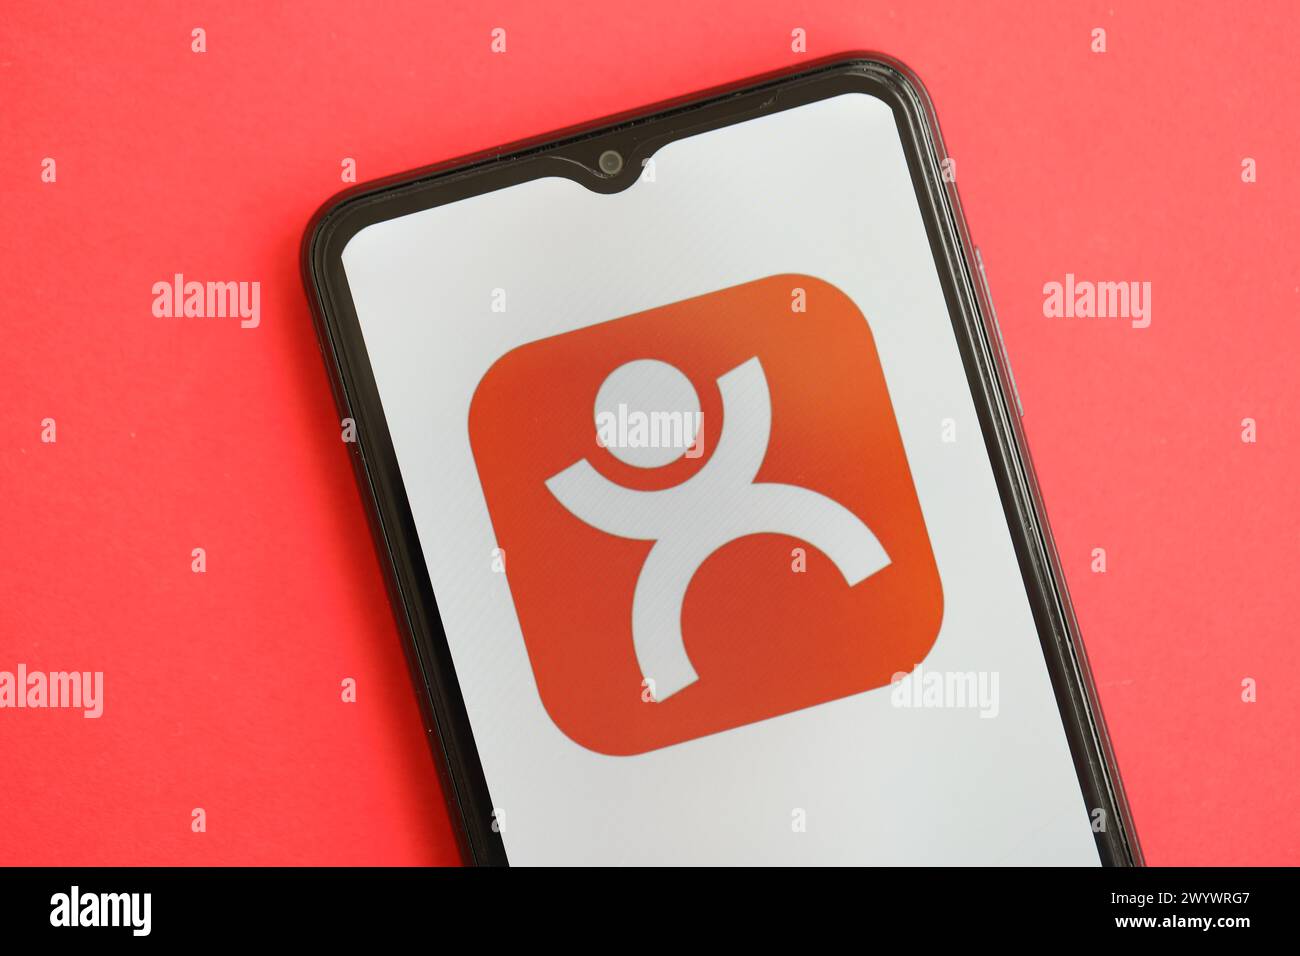 KYIV, UKRAINE - APRIL 1, 2024 Dianping platform icon on smartphone screen on red table close up. iPhone display with app logo on bright red background Stock Photo